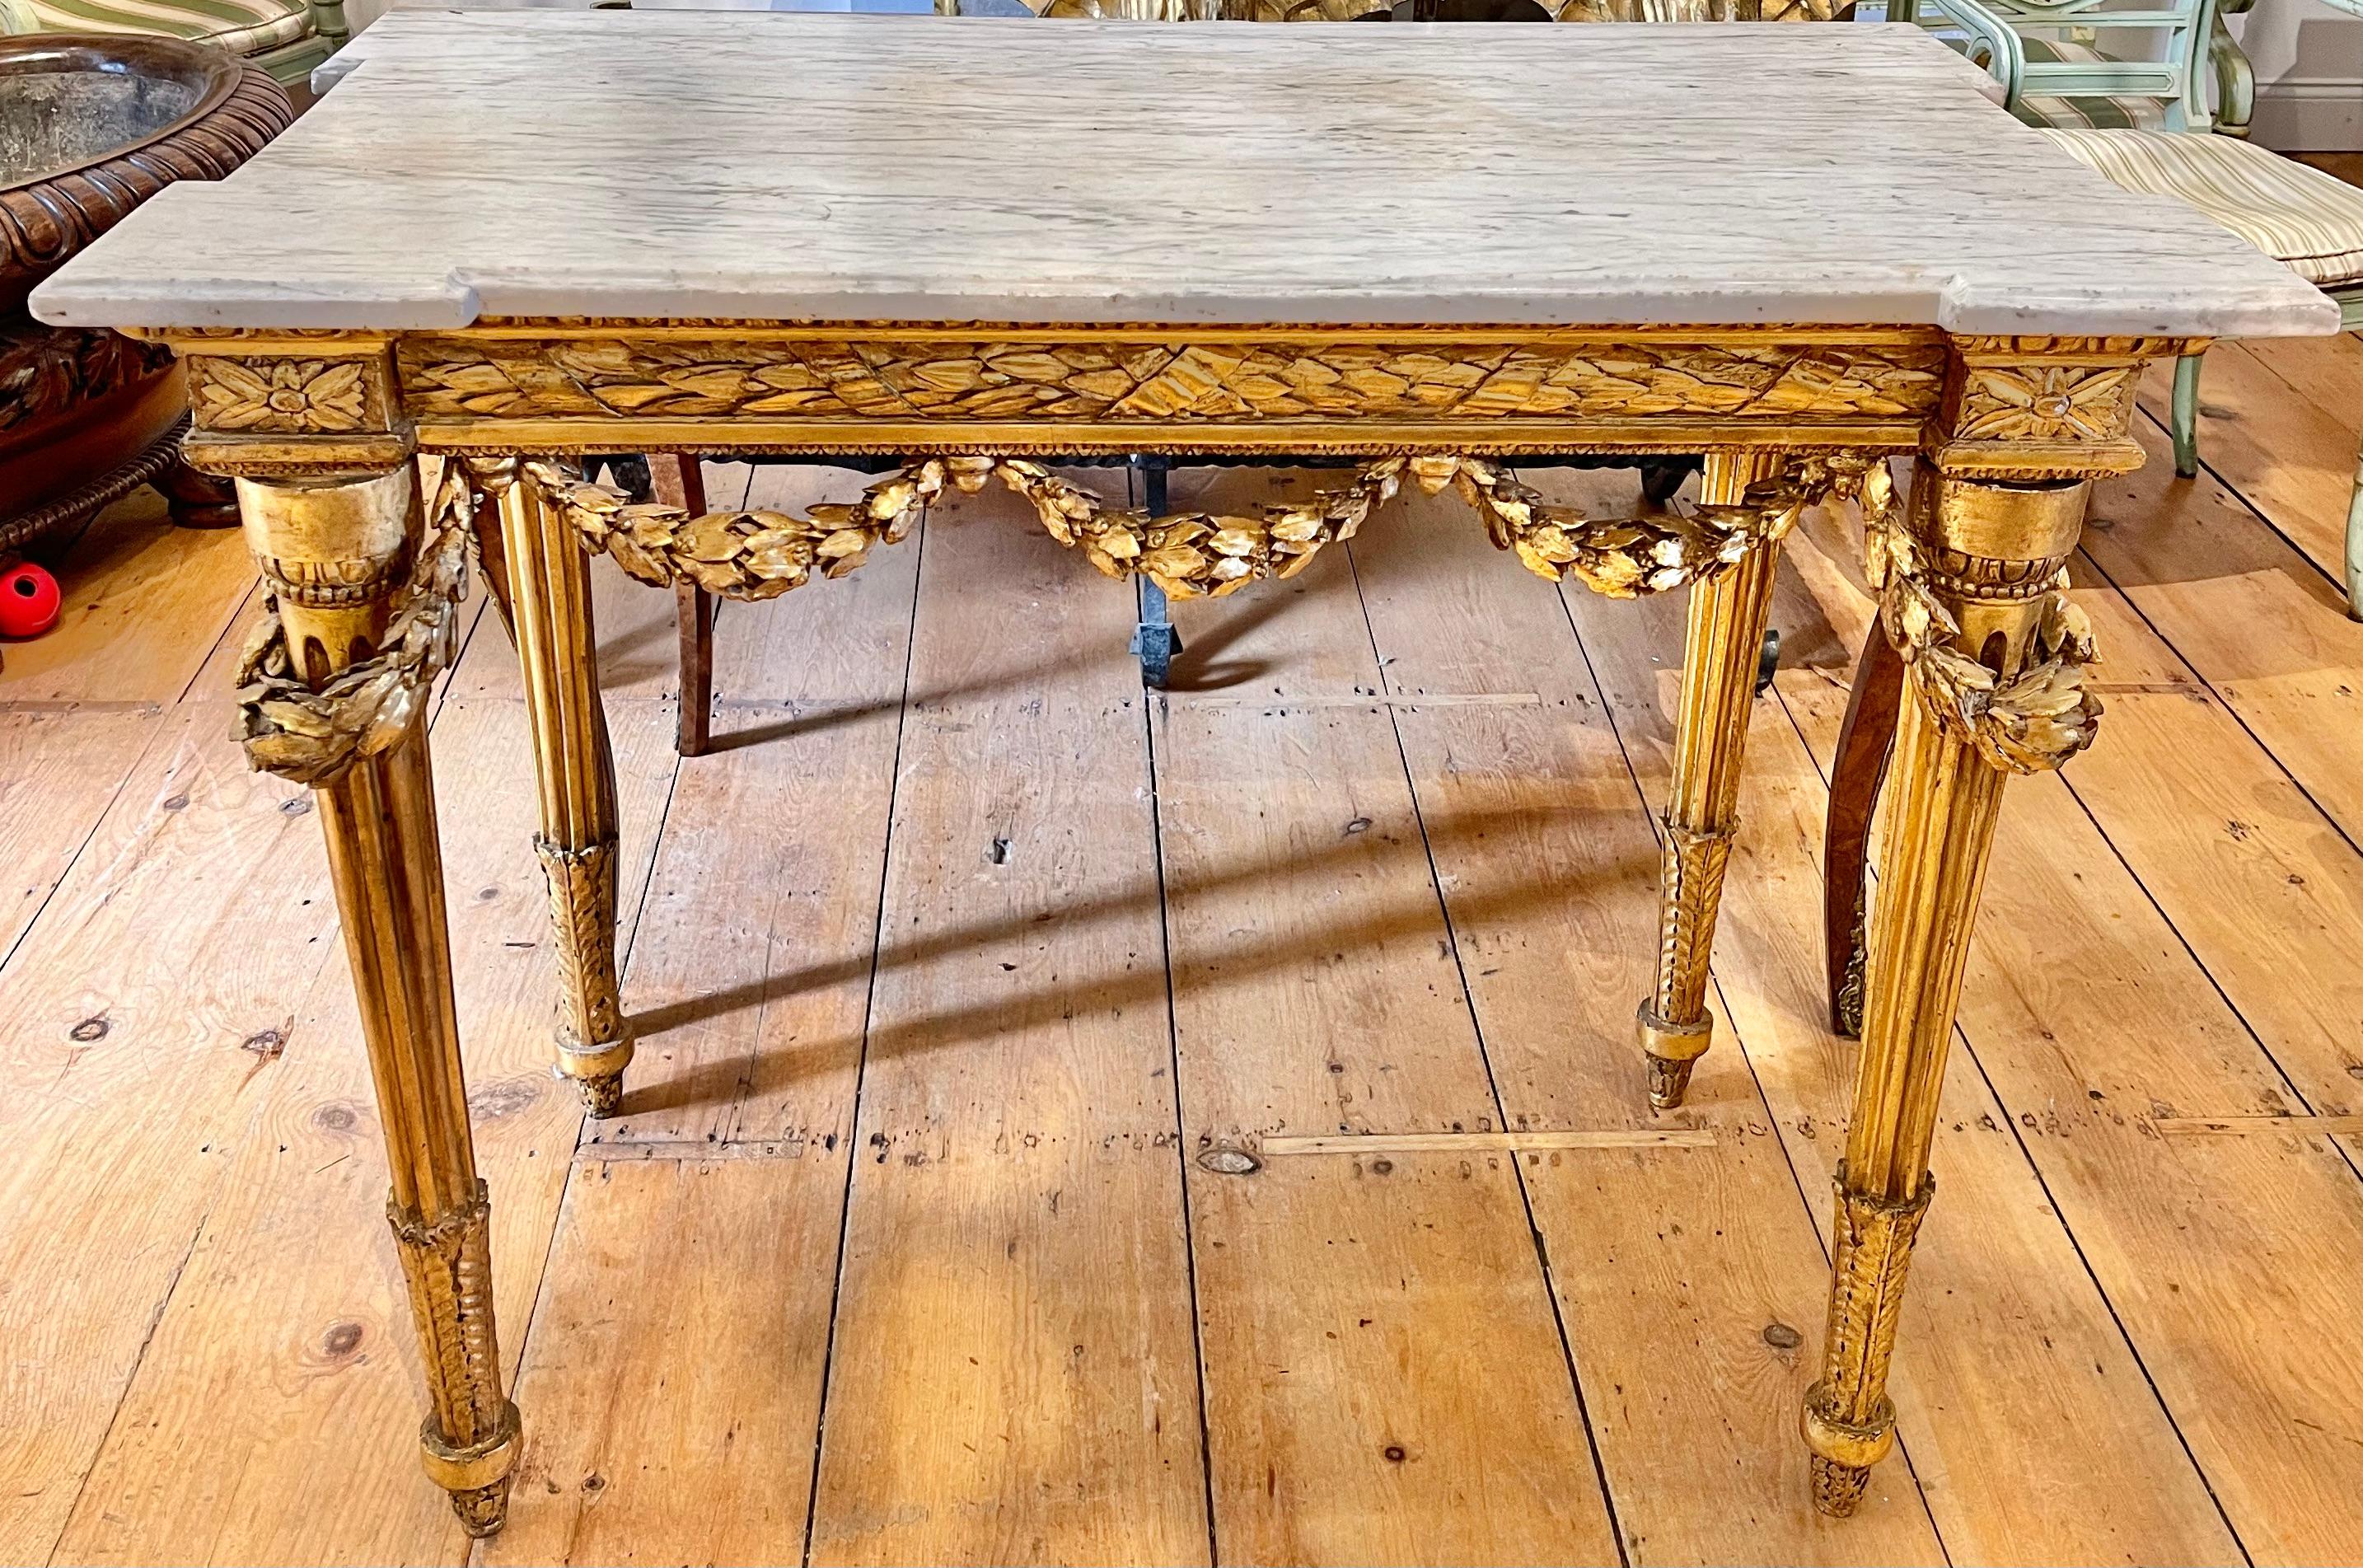 Period Italian neoclassical marble-top console table. Original gilt and marble. Lauren swags surround frieze of a laurel wreath. Round reeded tapered legs. A beautiful original piece.
 